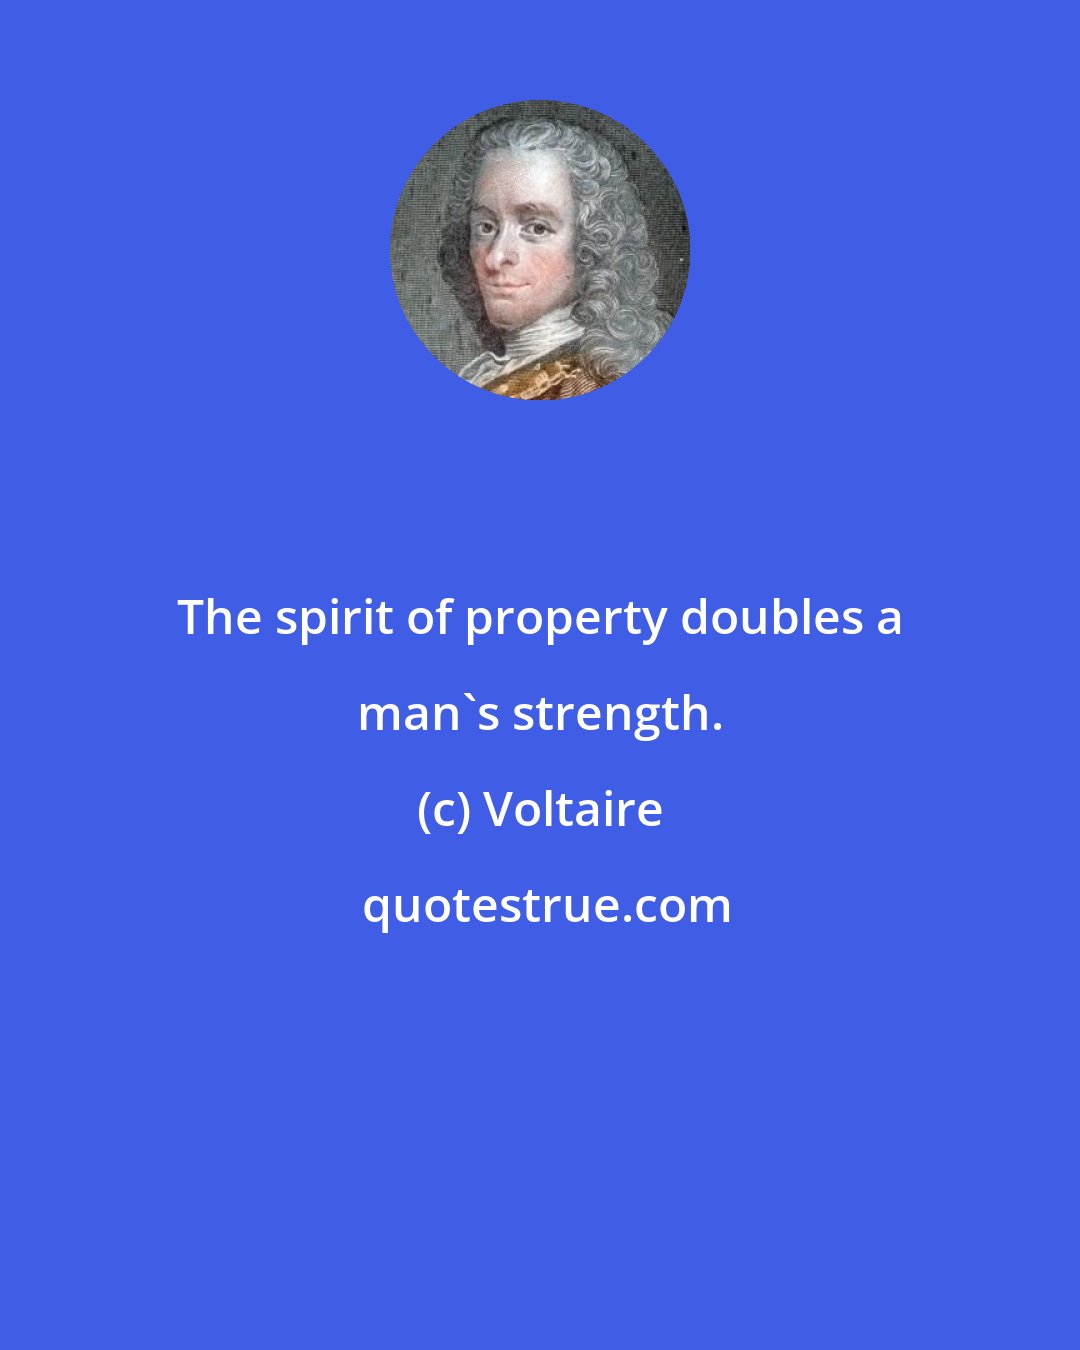 Voltaire: The spirit of property doubles a man's strength.